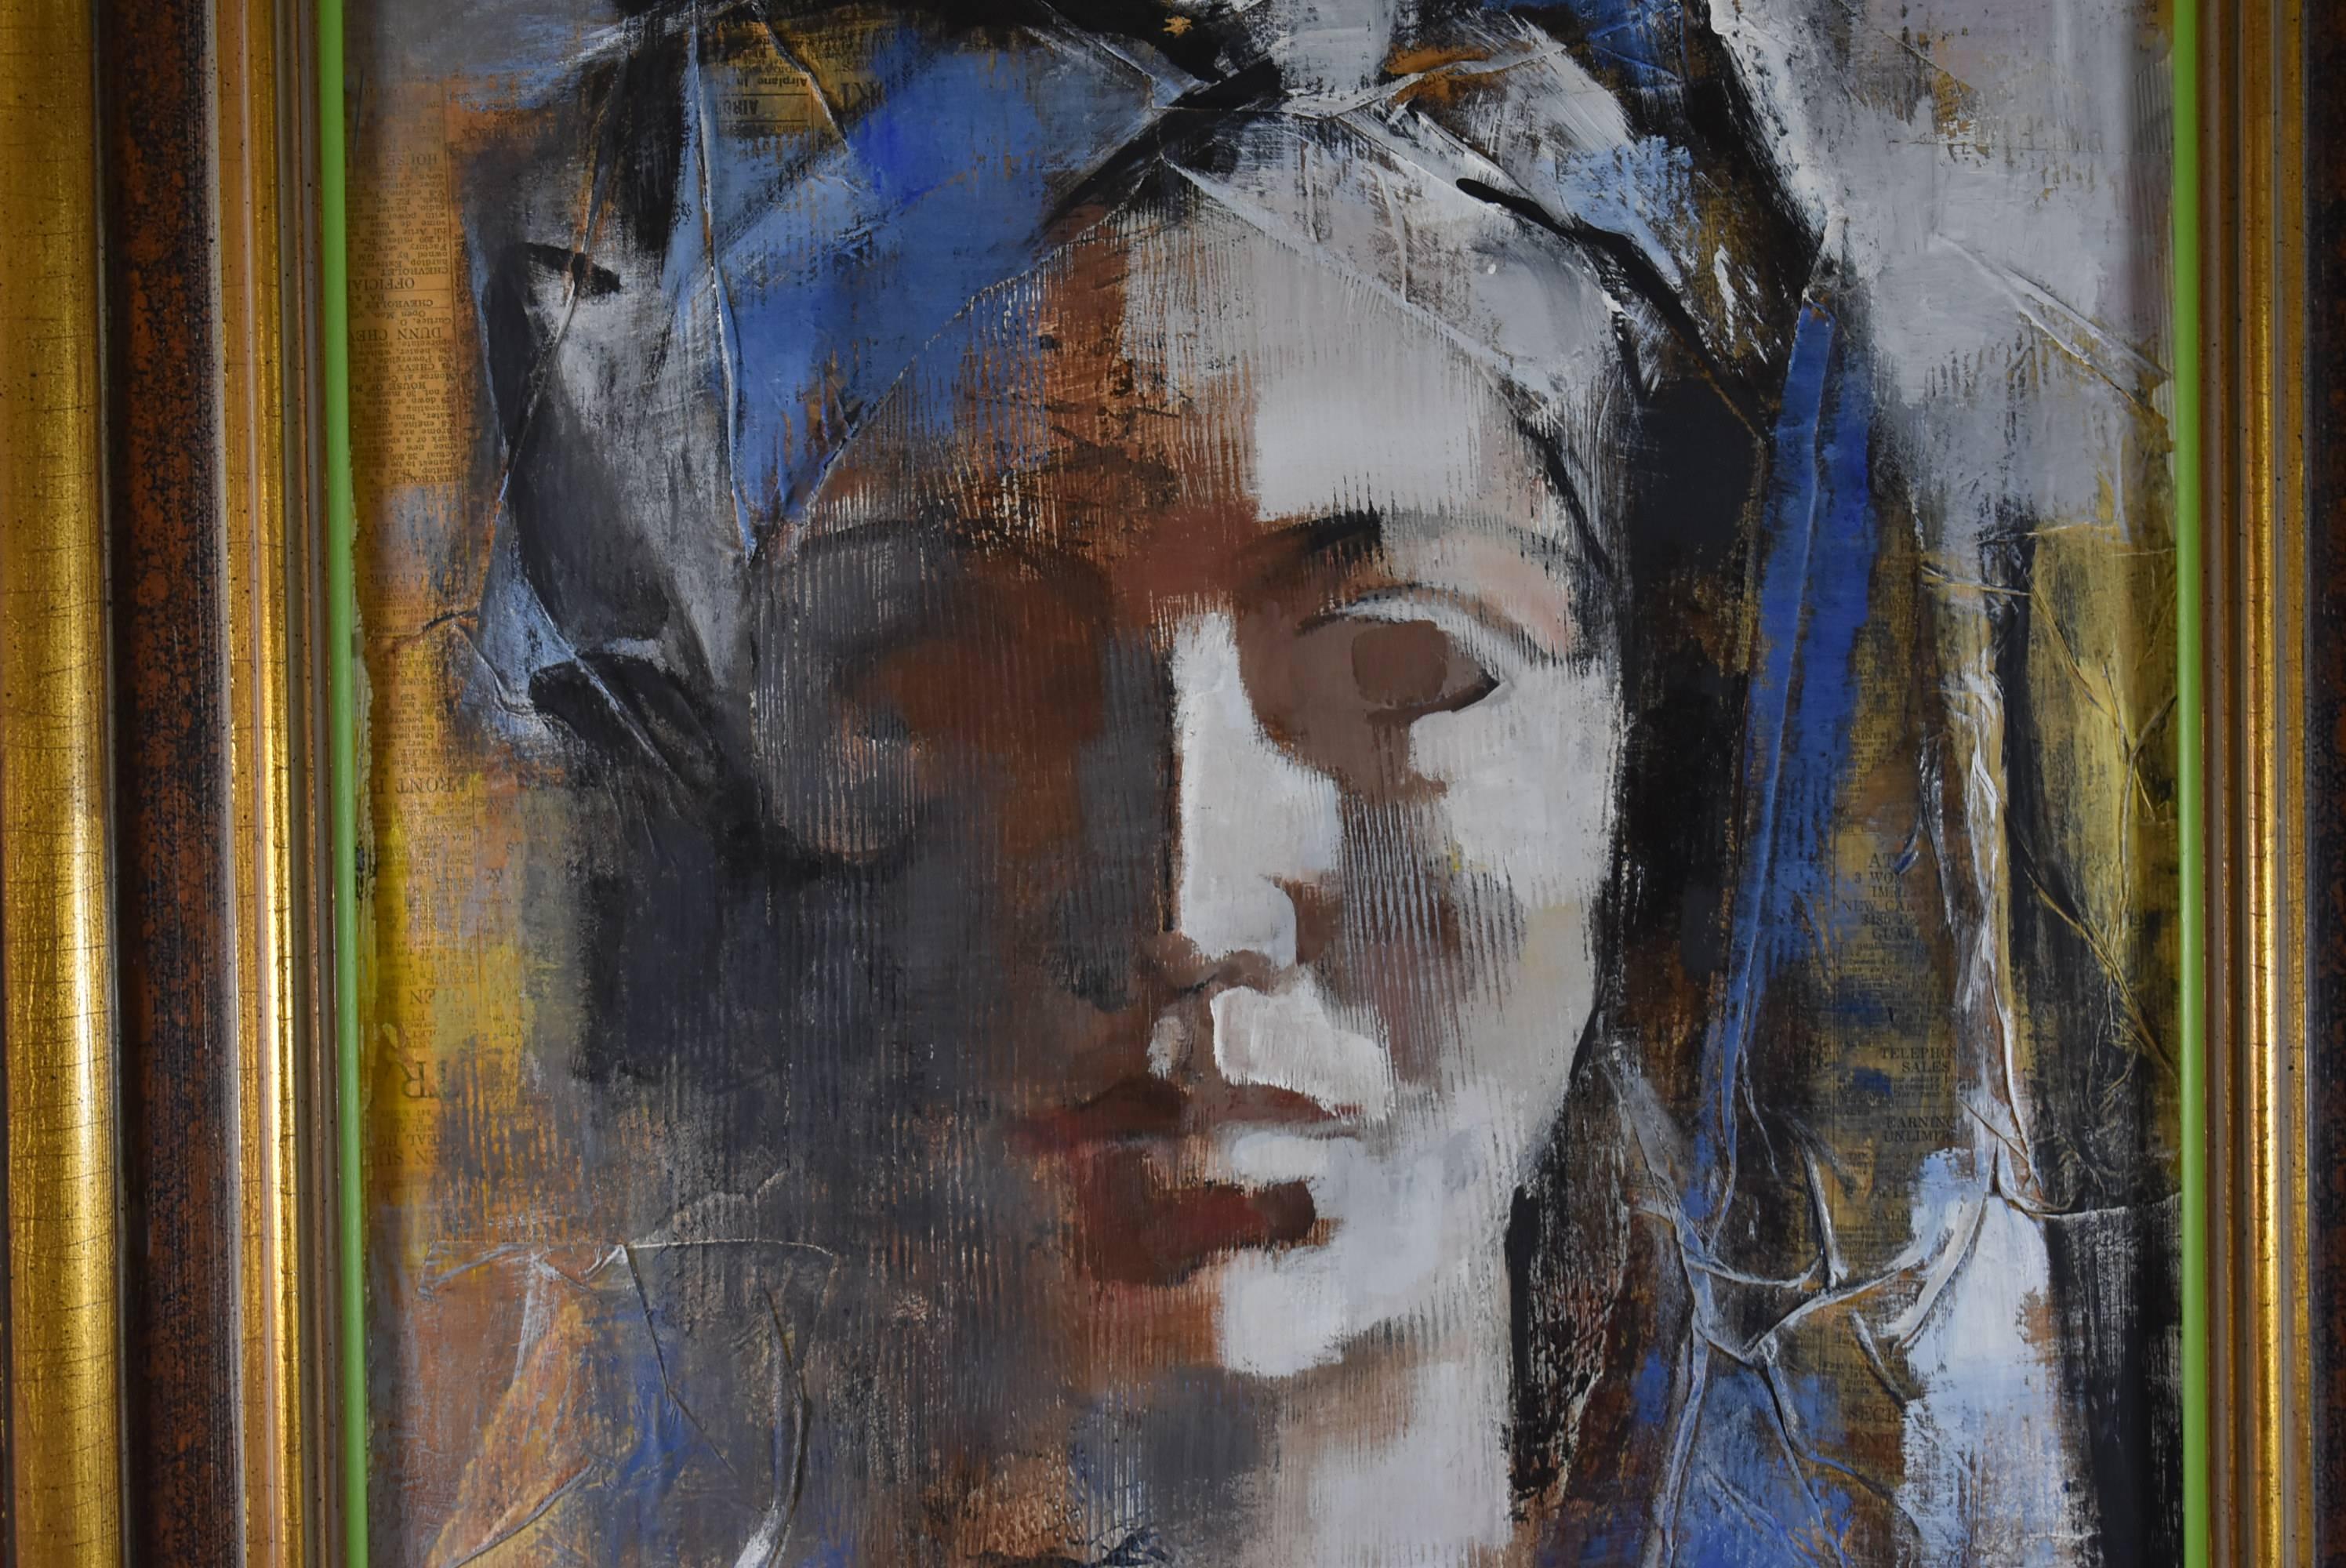 A dynamic original mid modern painting by artist Adam Grant, circa 1970s. Female portrait on paper laid on artists board with folded textured dimensional details. Primary blues, white and striking black highlights. Original frame. Image size is 17